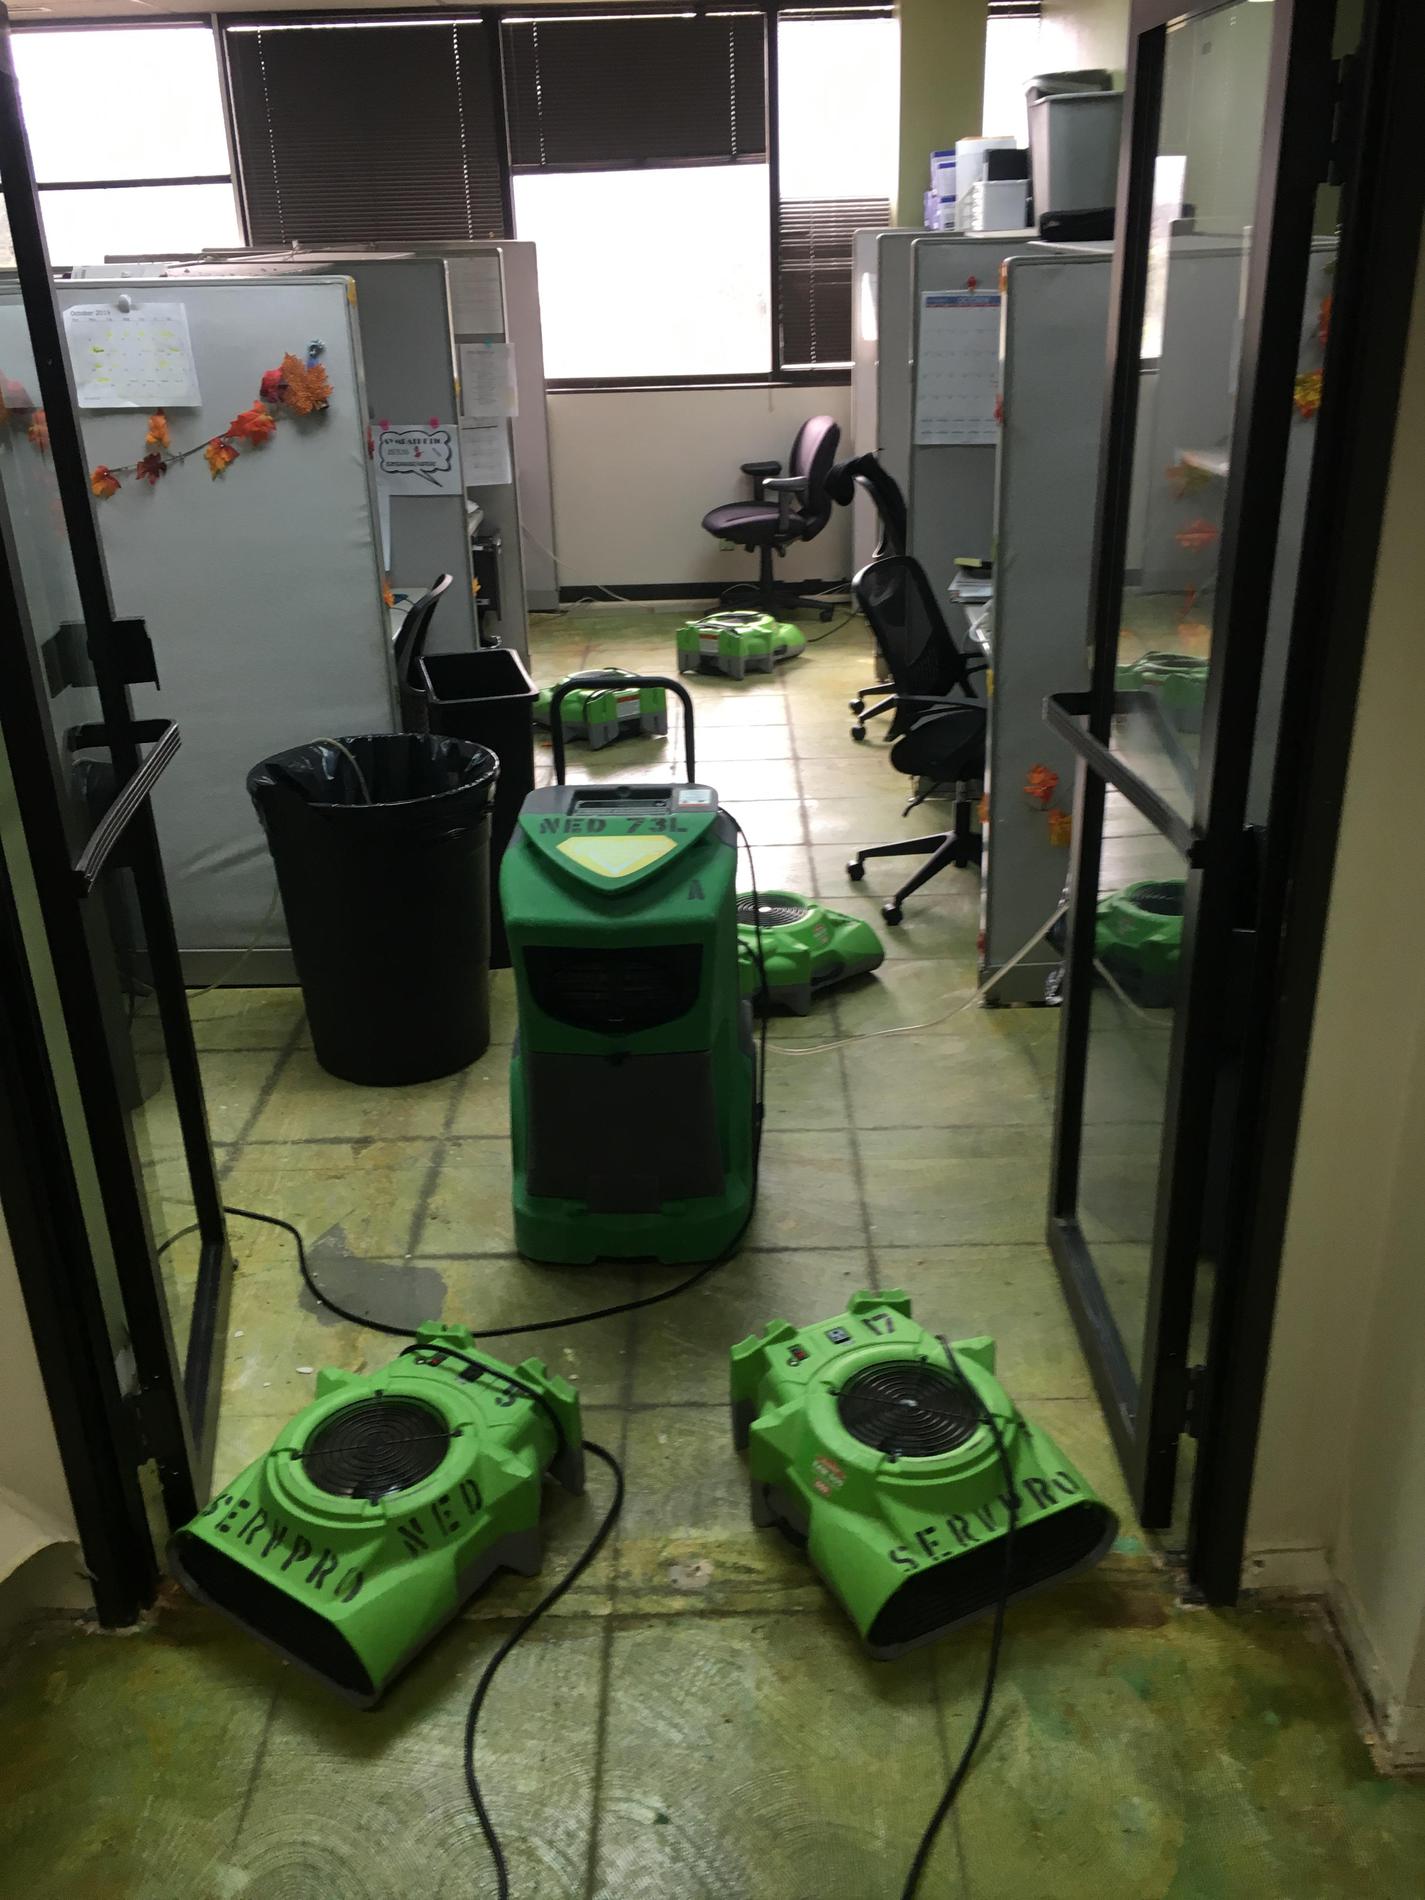 Images SERVPRO of Northeast Dallas